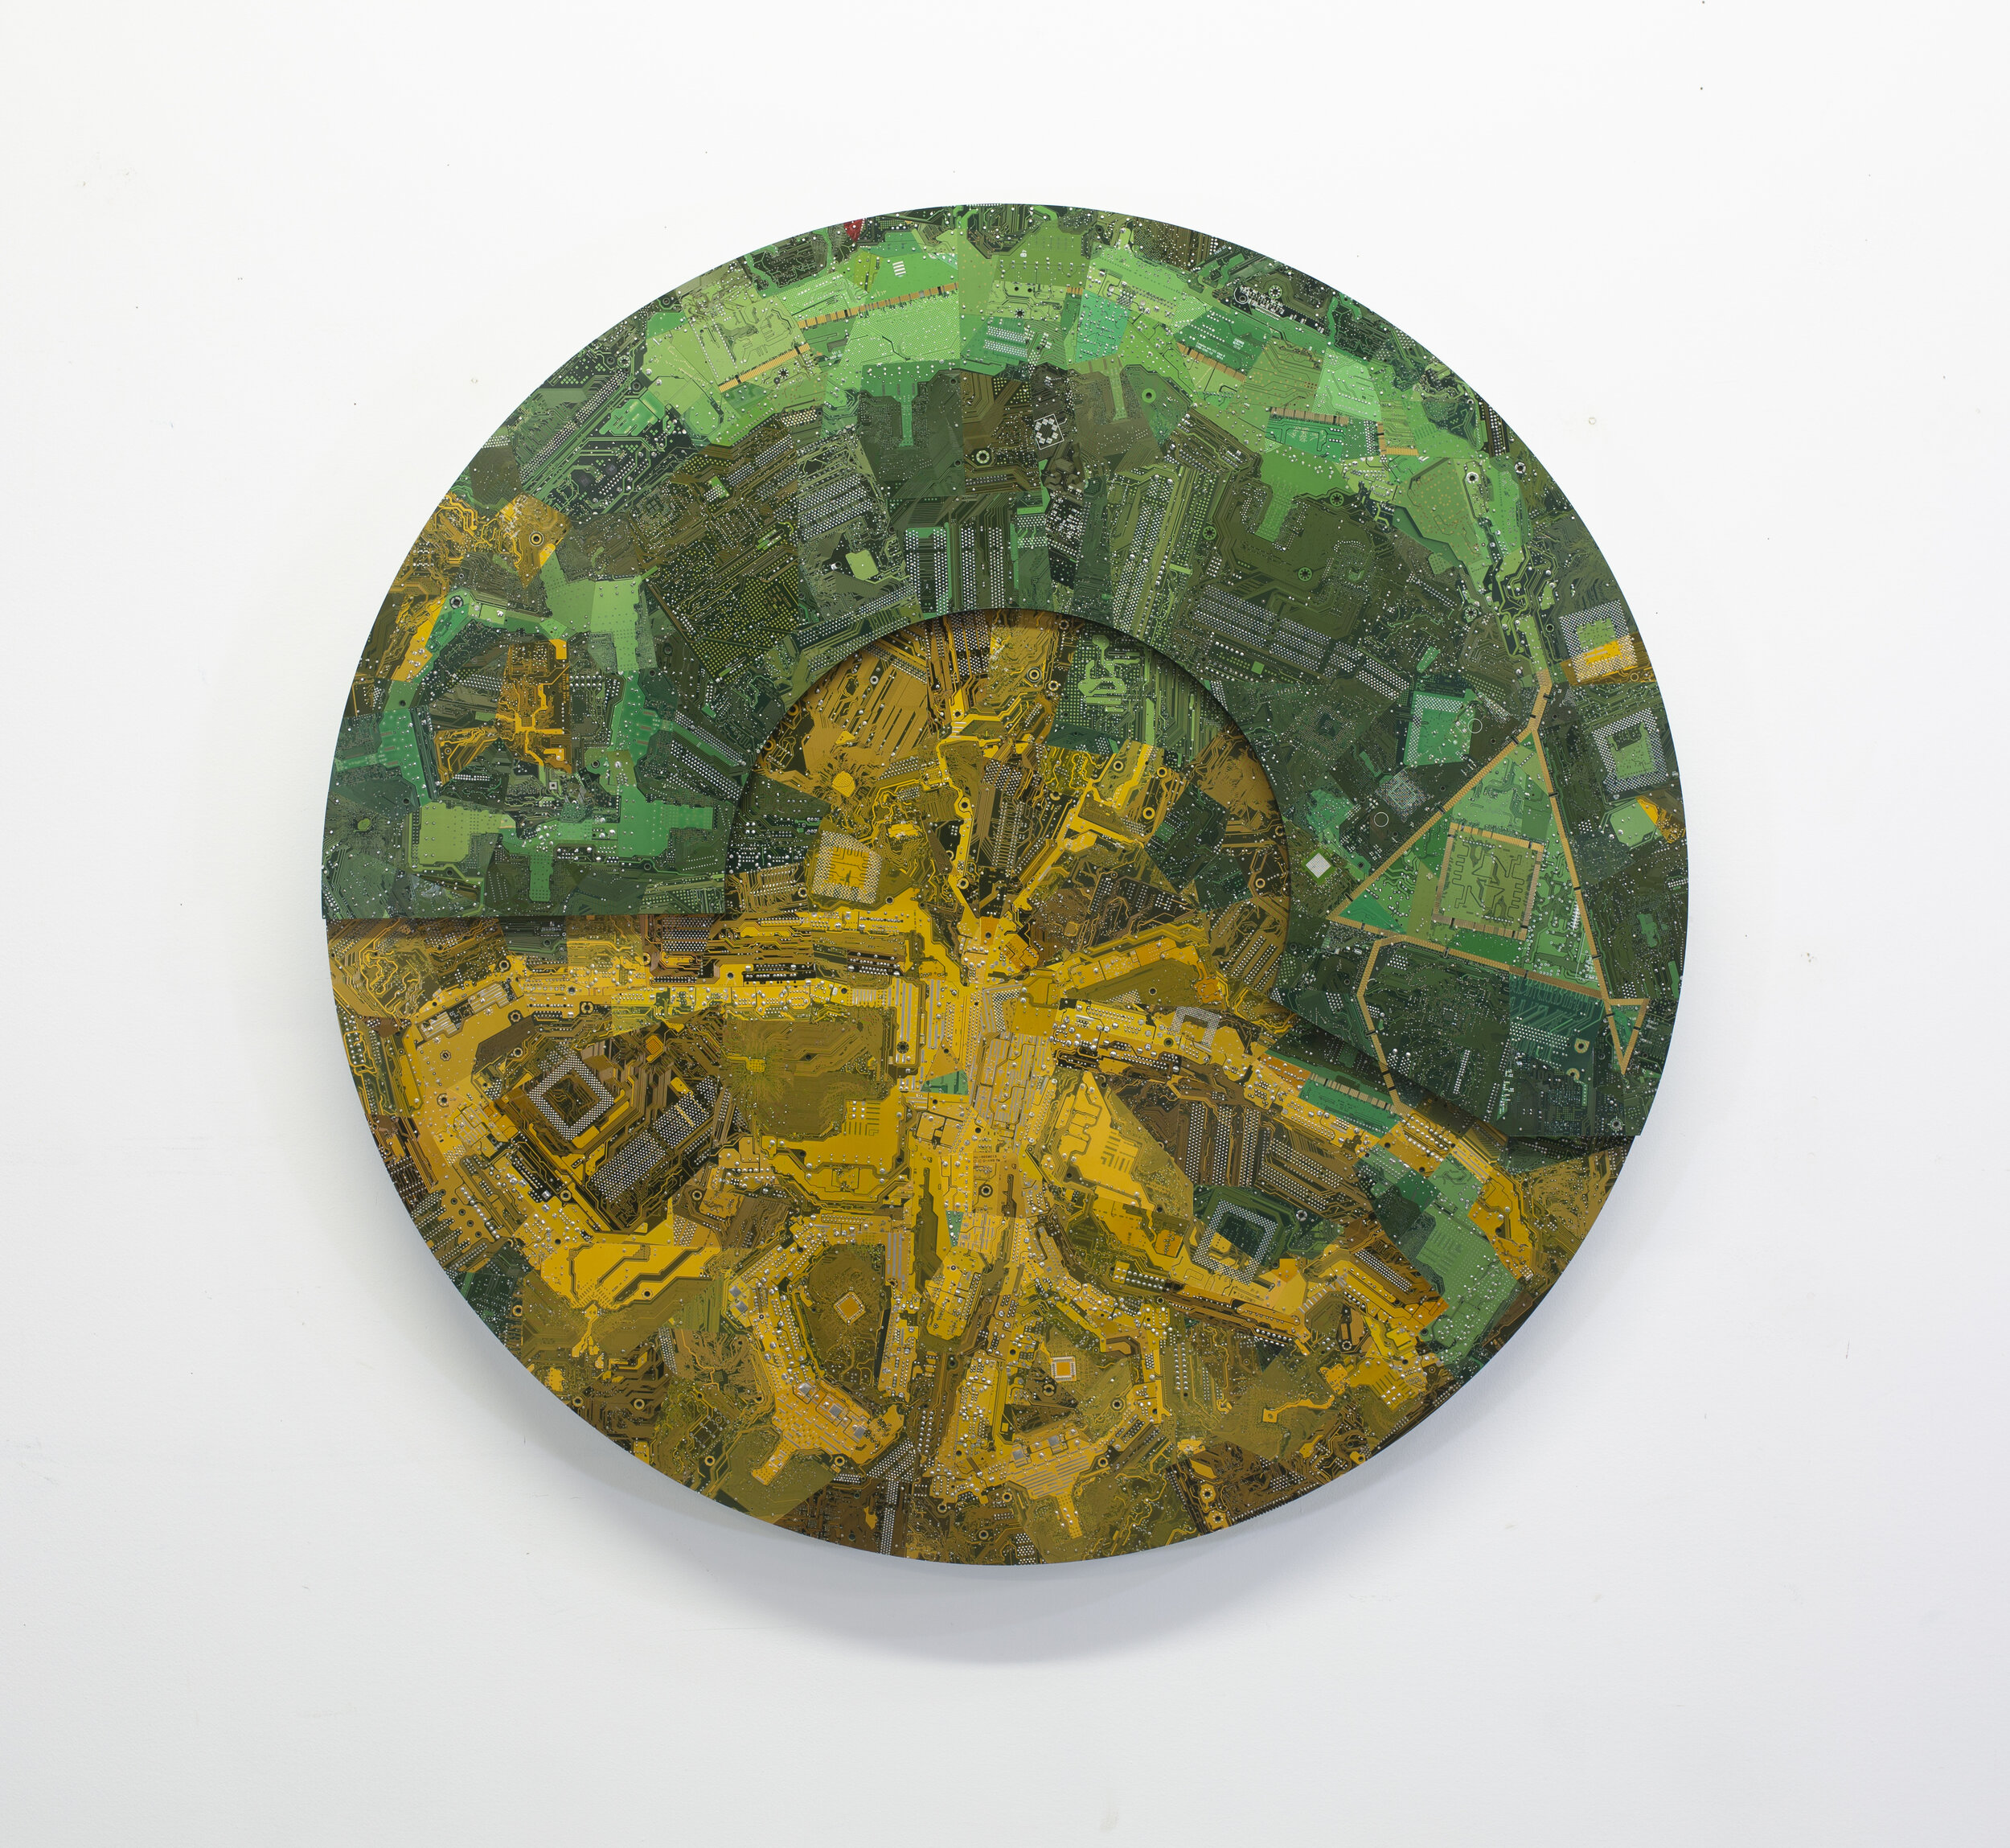   Caterpillar, Egg, Cocoon, Moth , 2019. Circuit boards on plywood, and nails, 87 cm diameter. COURTESY OF KT KANAZAWICH 